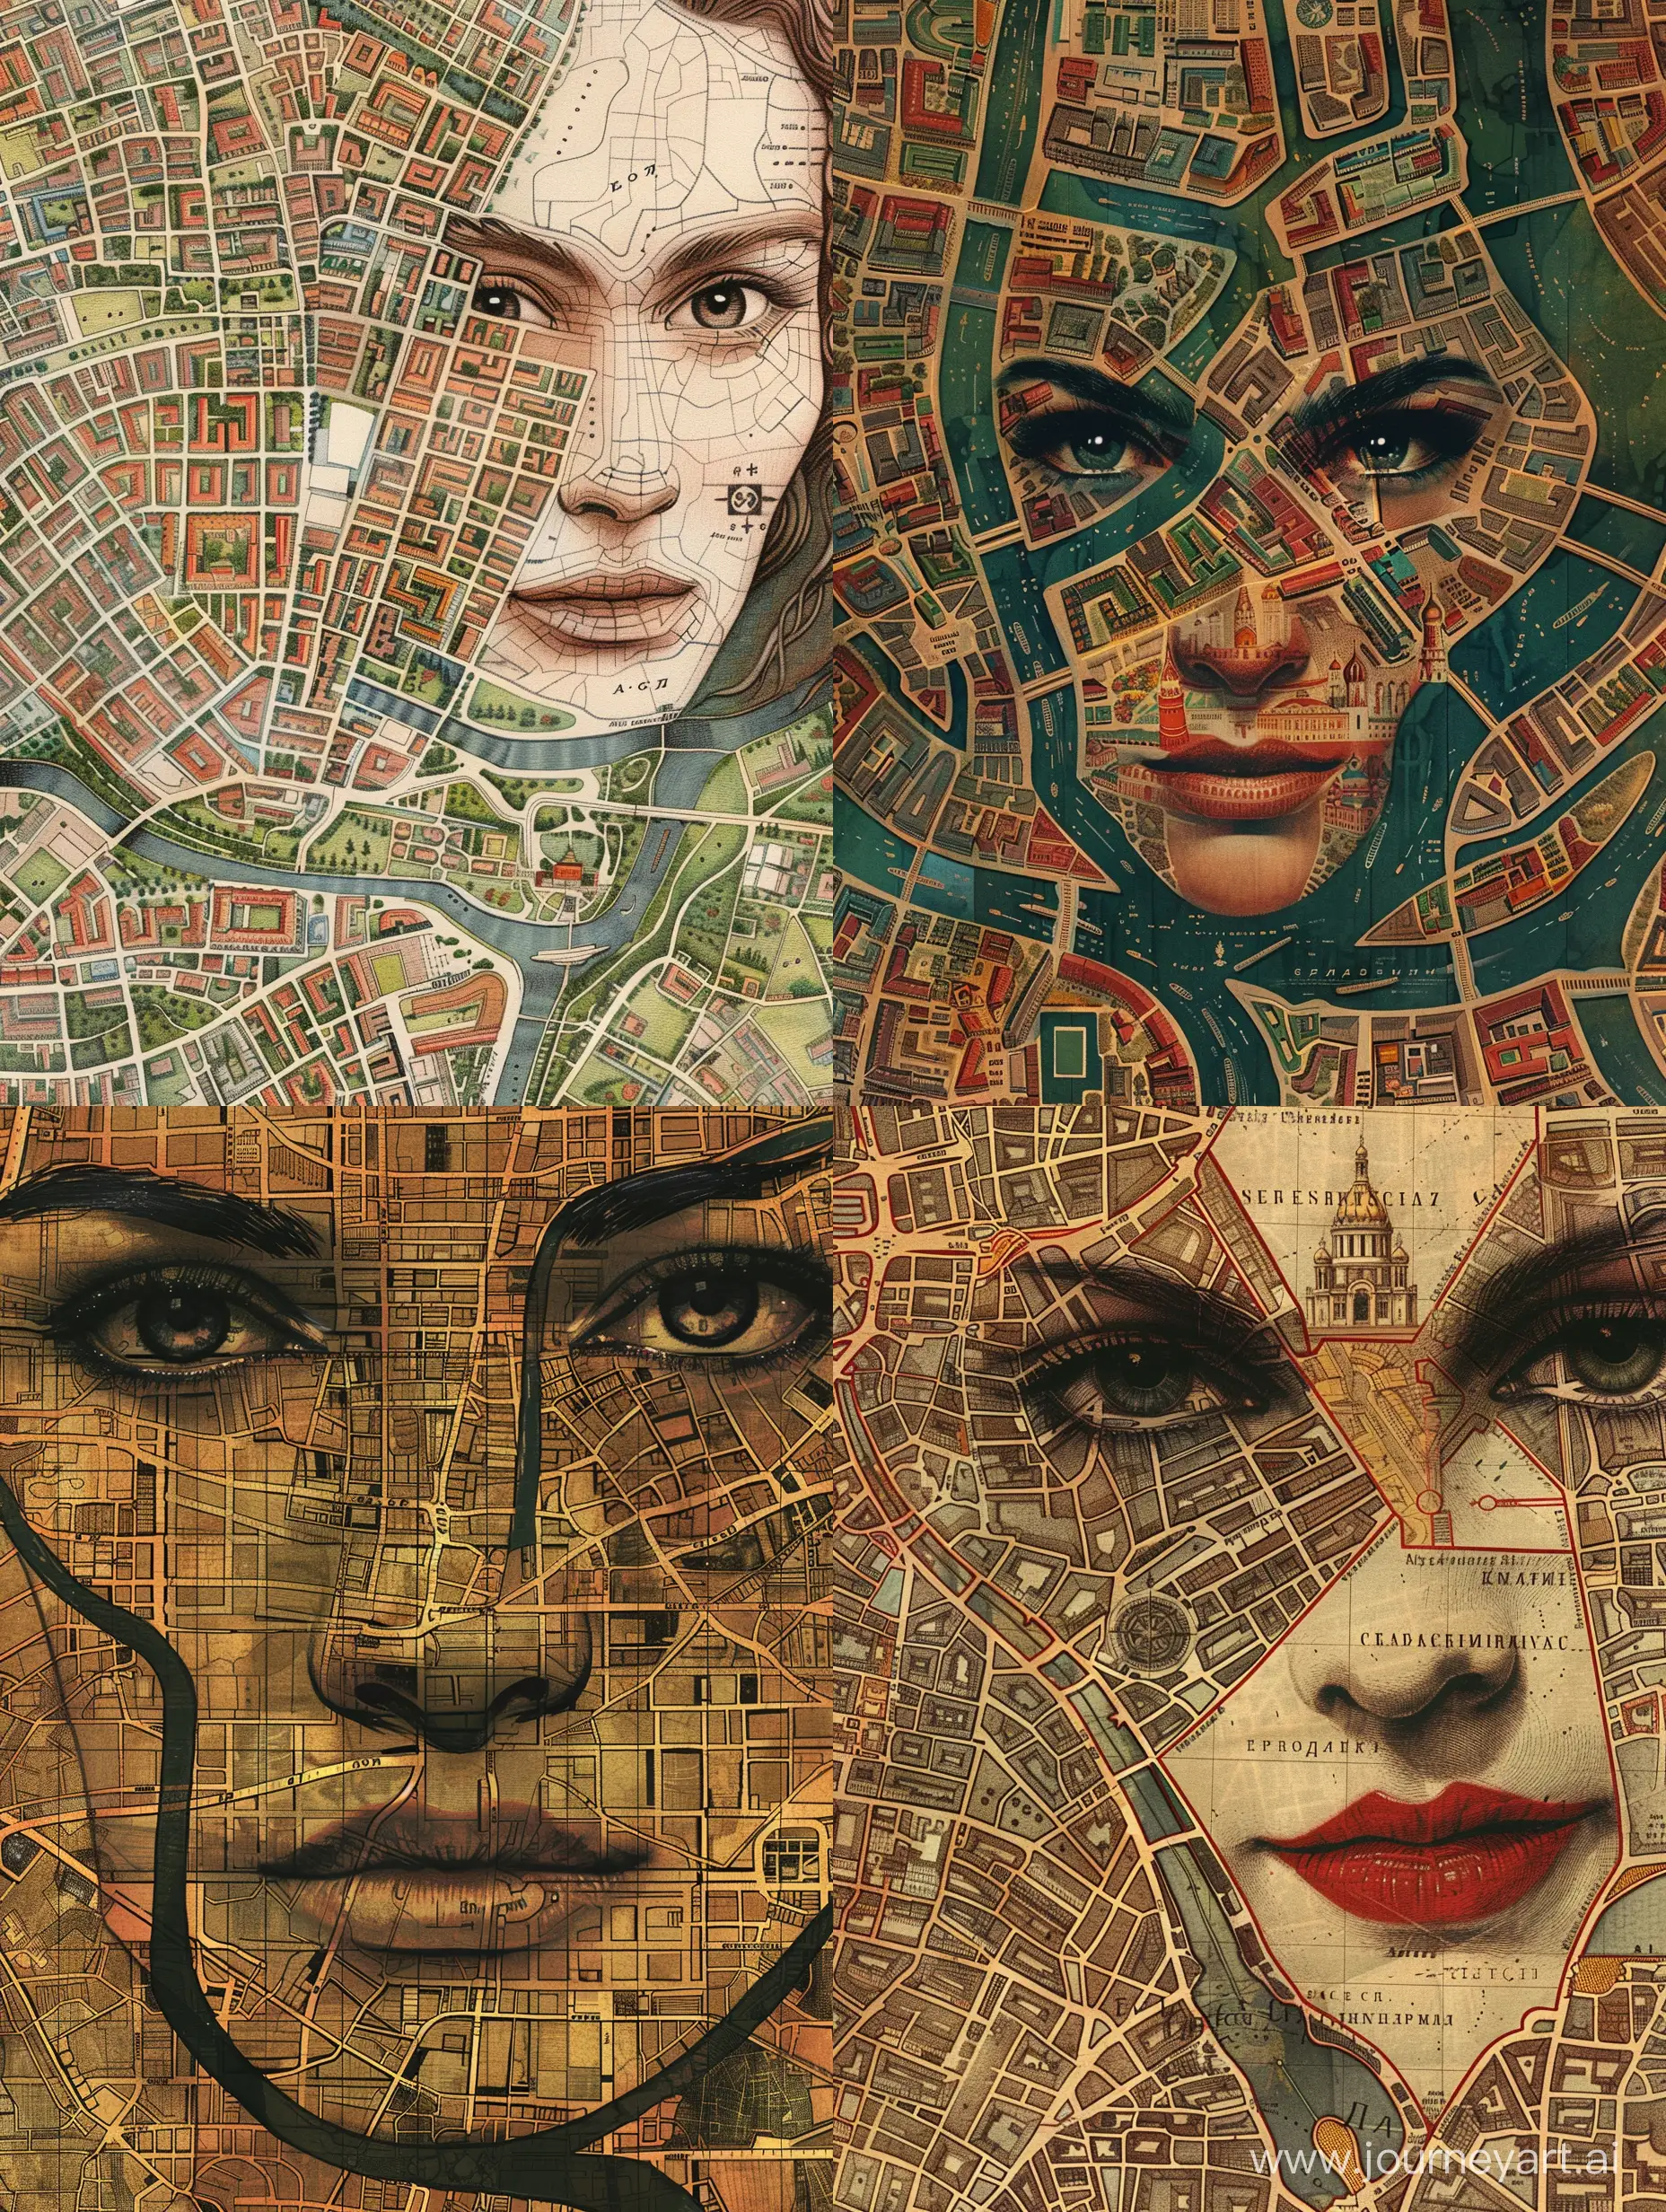 Moscow map, streets and houses, butiful woman's Face bihaind the streets, details